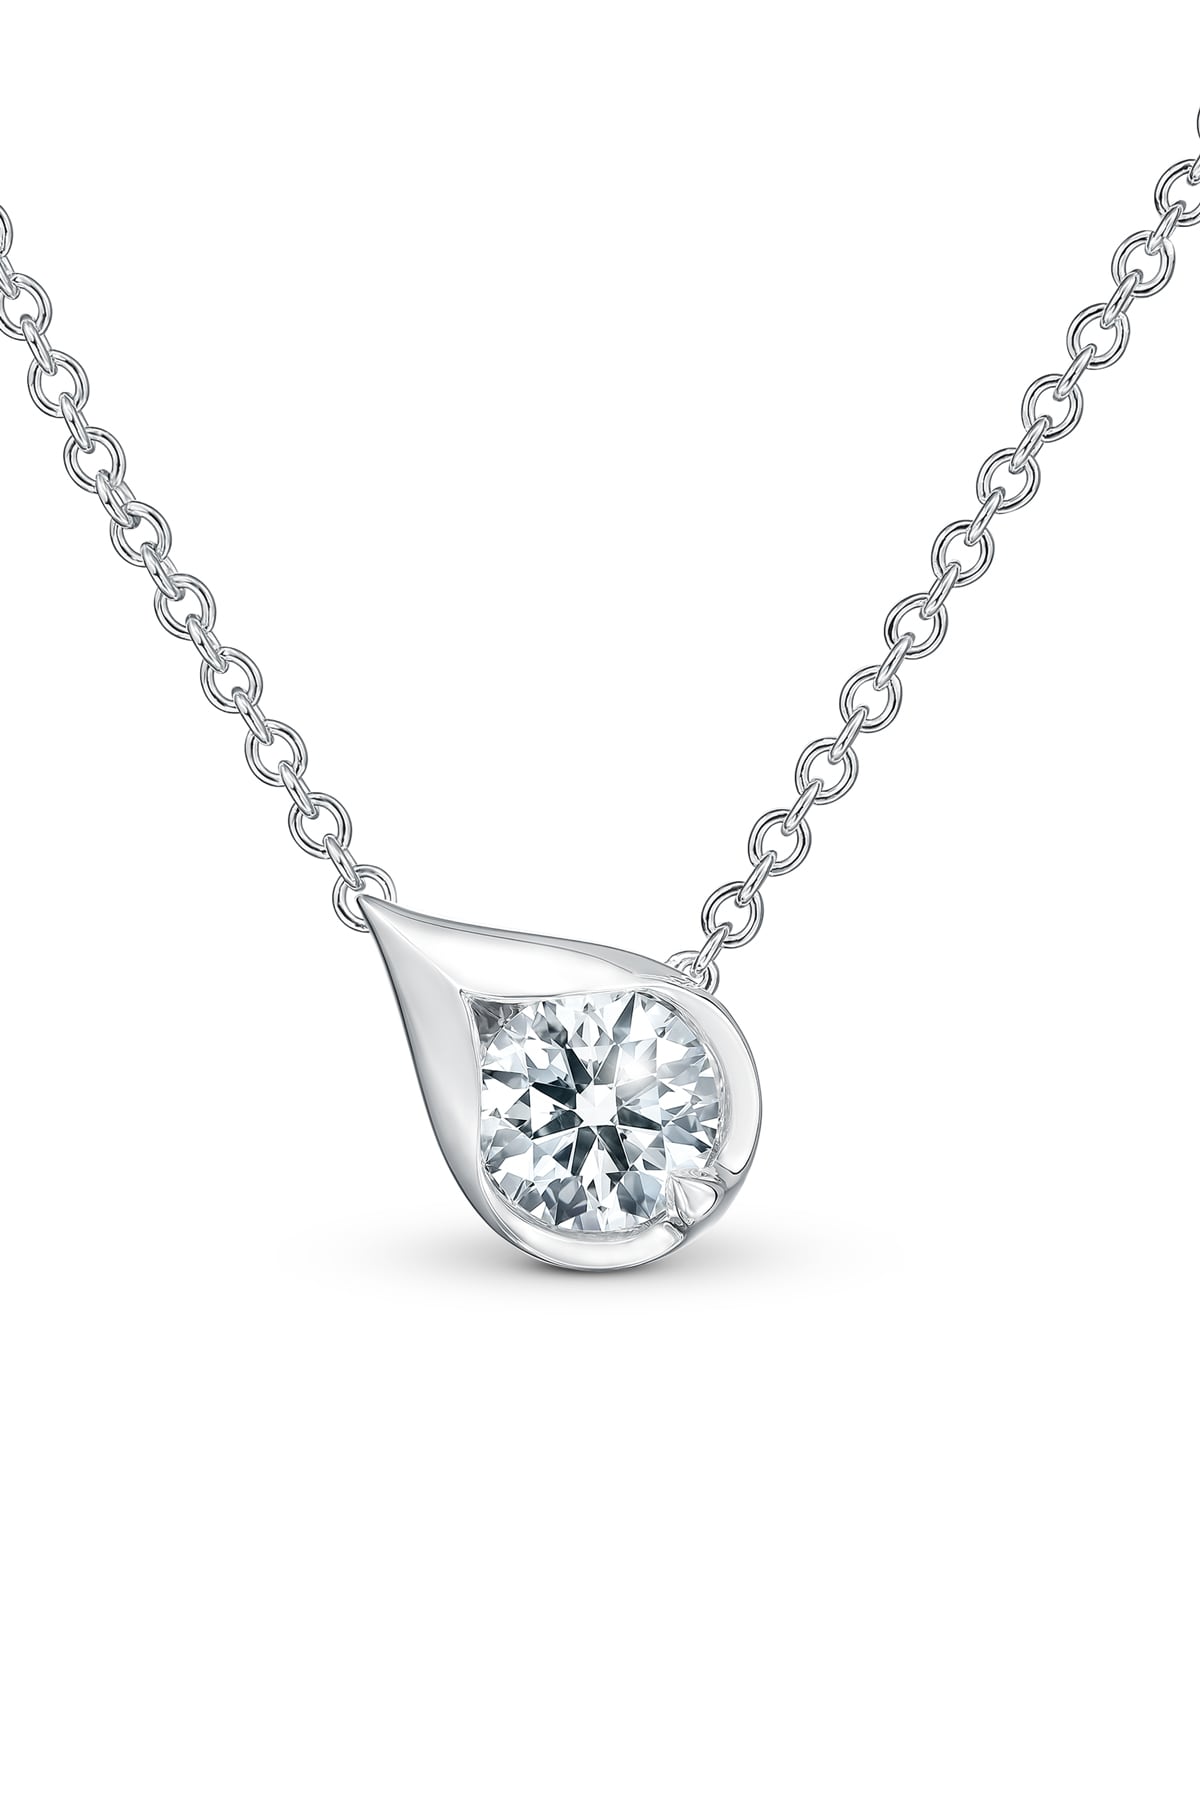 LU Droplet Pendant In White Gold From Hearts On Fire exclusive to LeGassick Jewellery, Gold Coast, Australia.